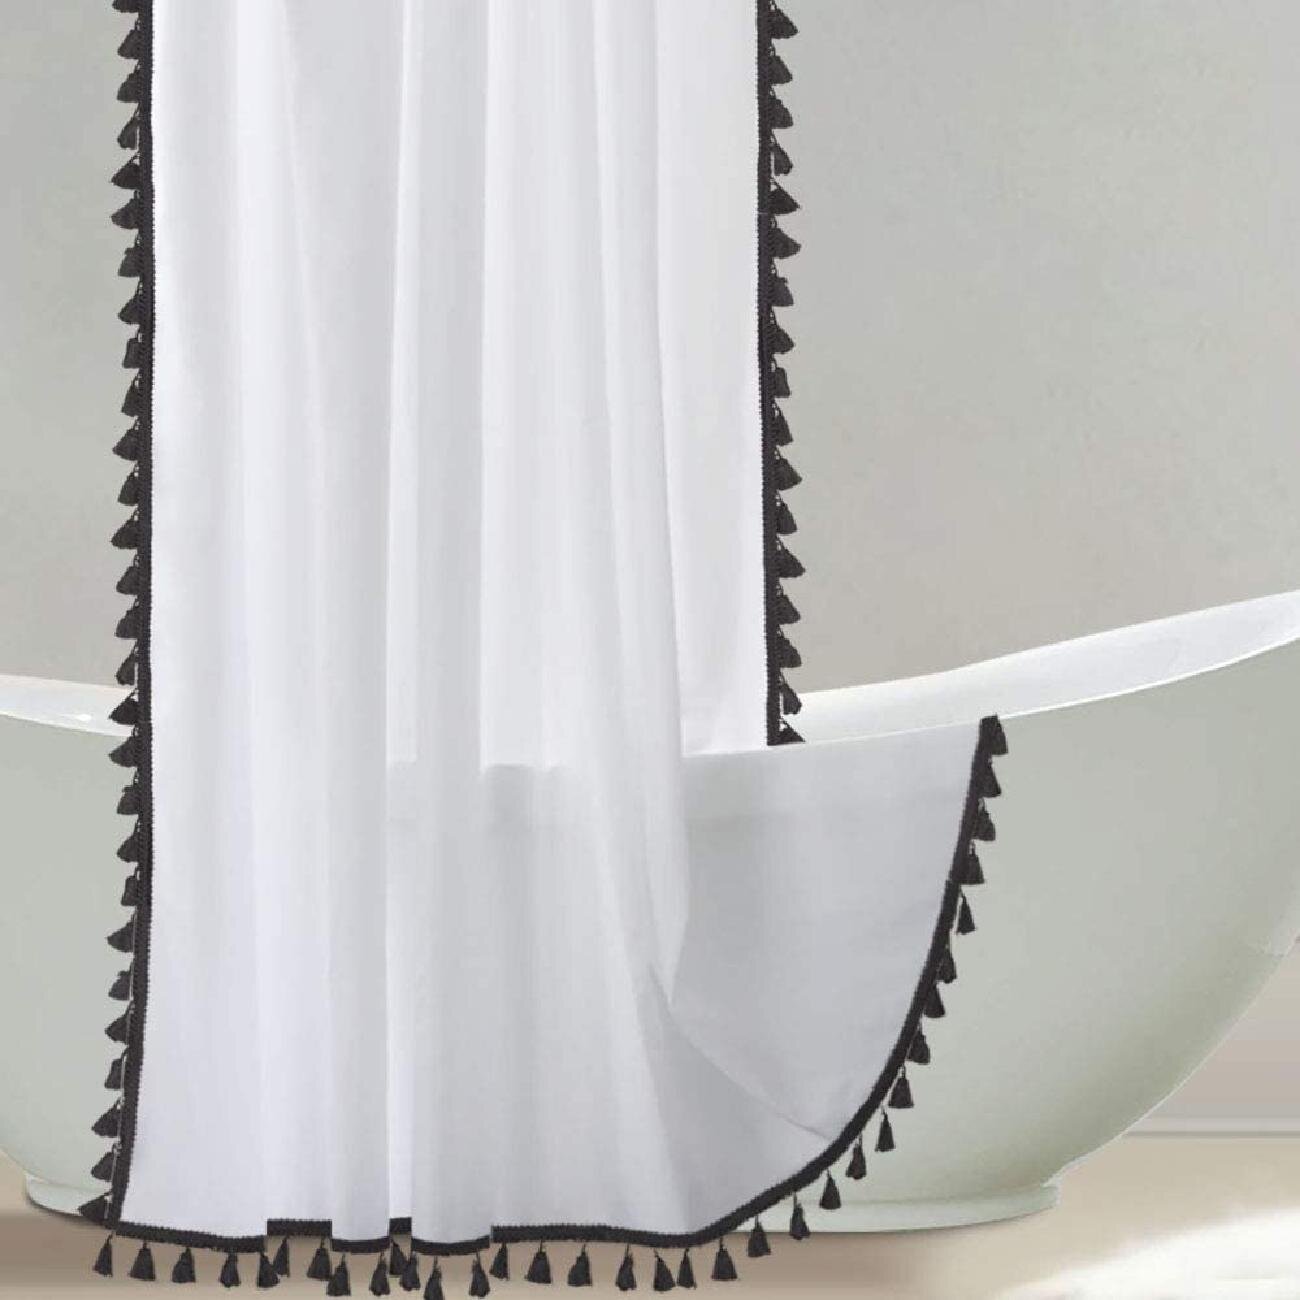 black and white shower curtain